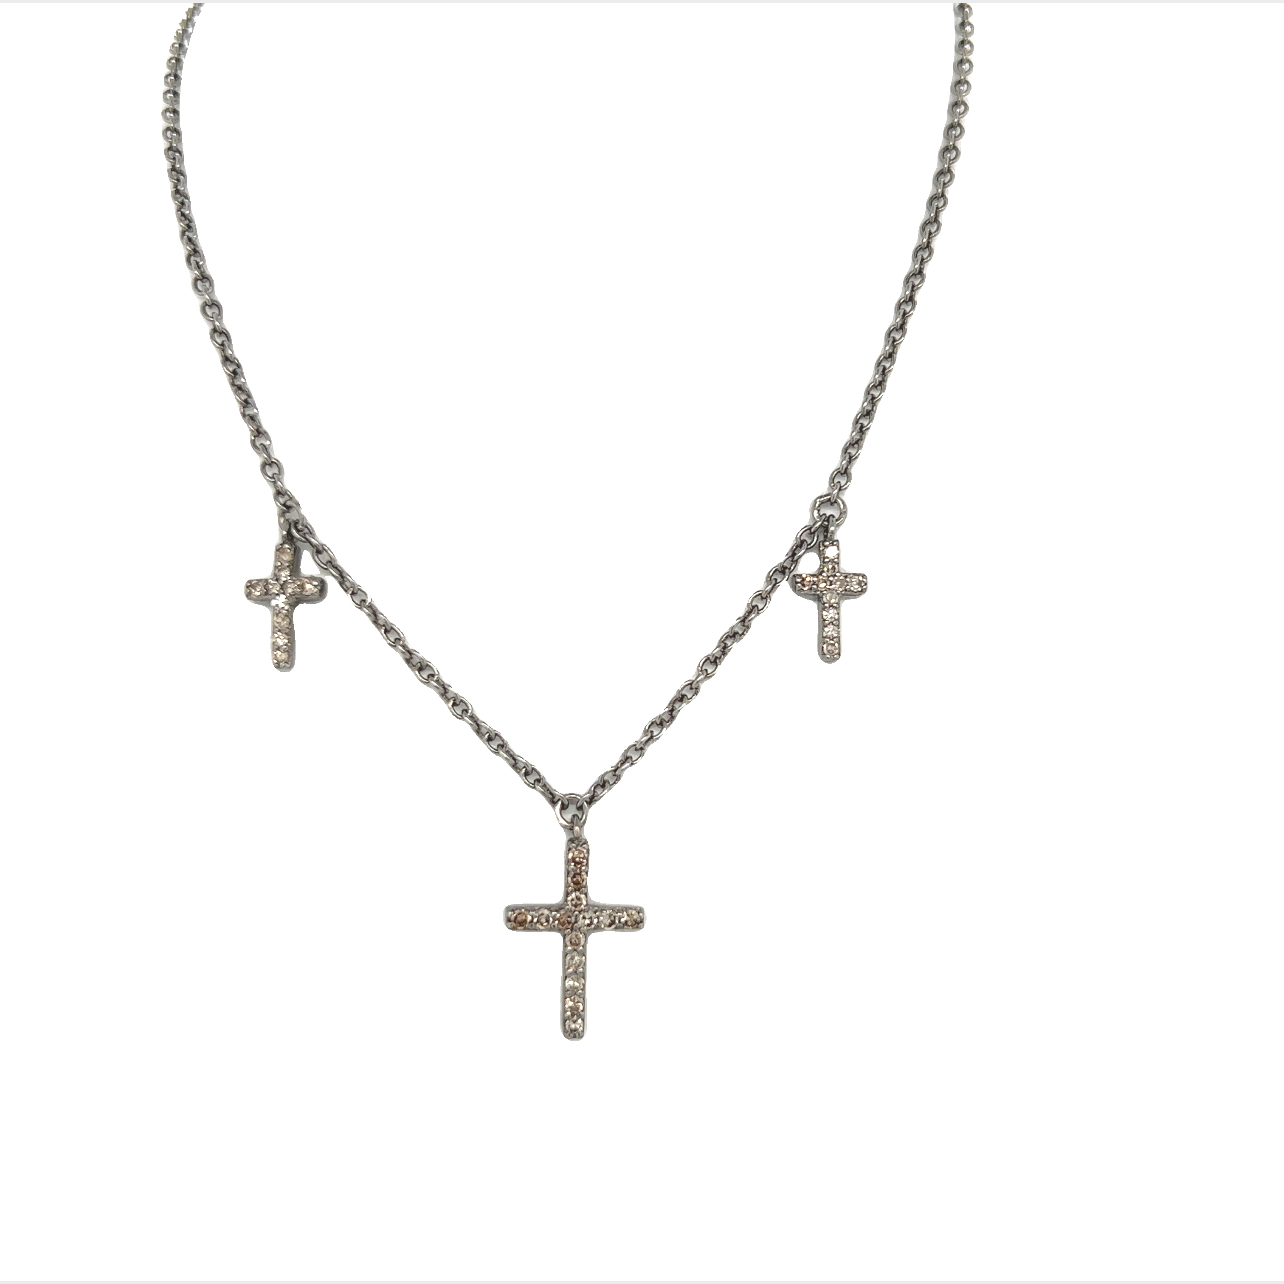 Featured image for “3 Cross Oxidized Necklace”